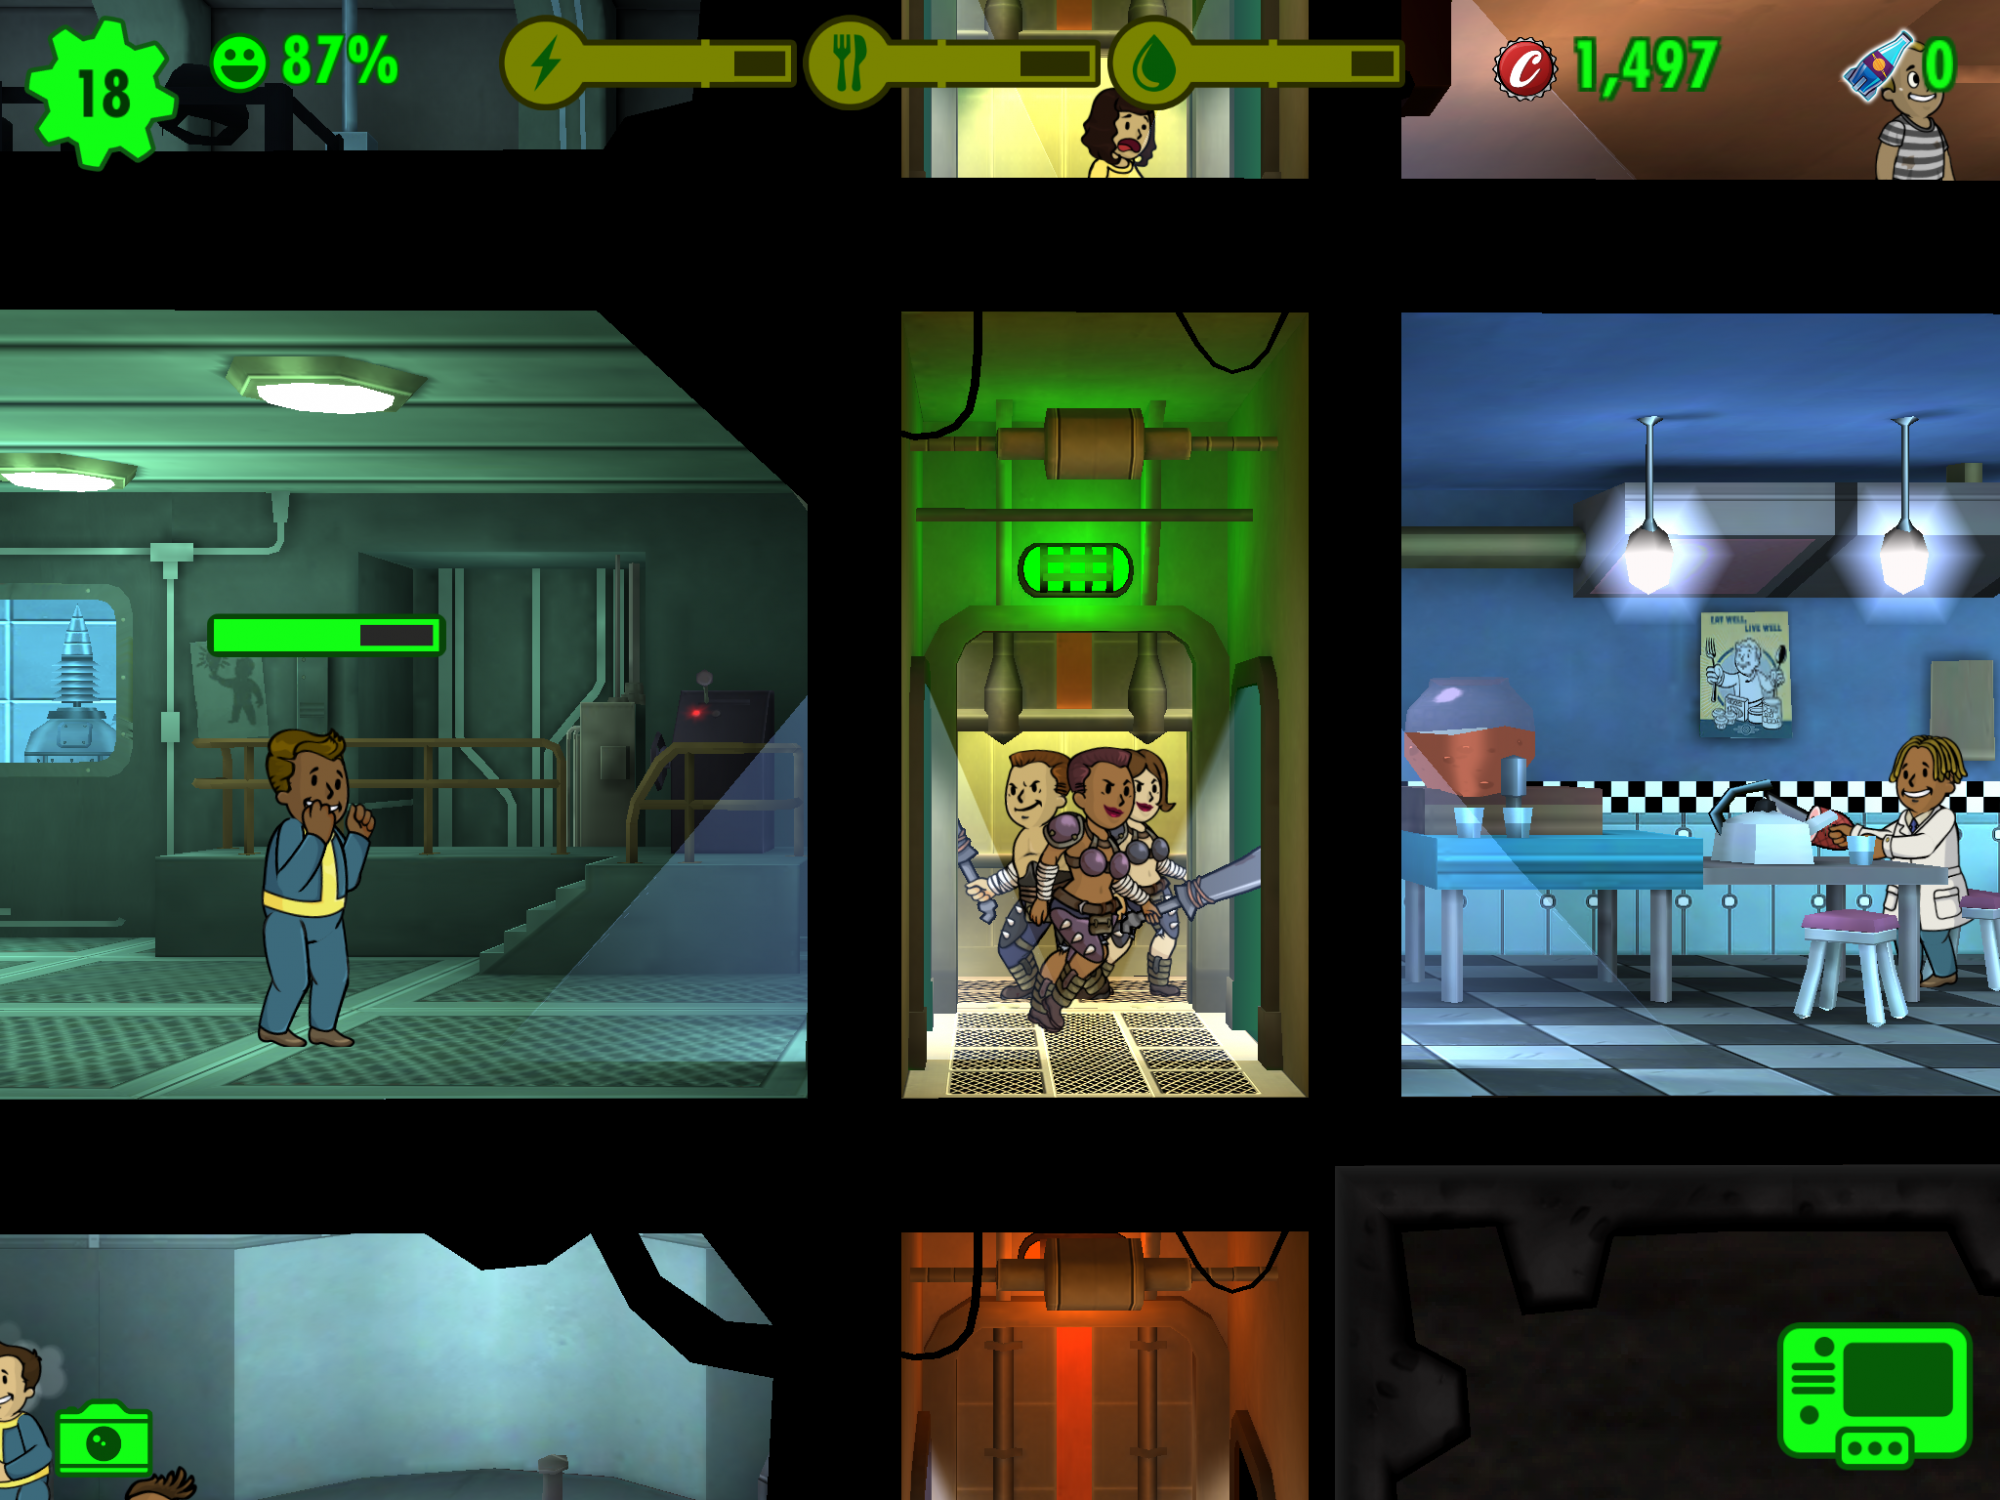 fallout shelter for xbox one cheats